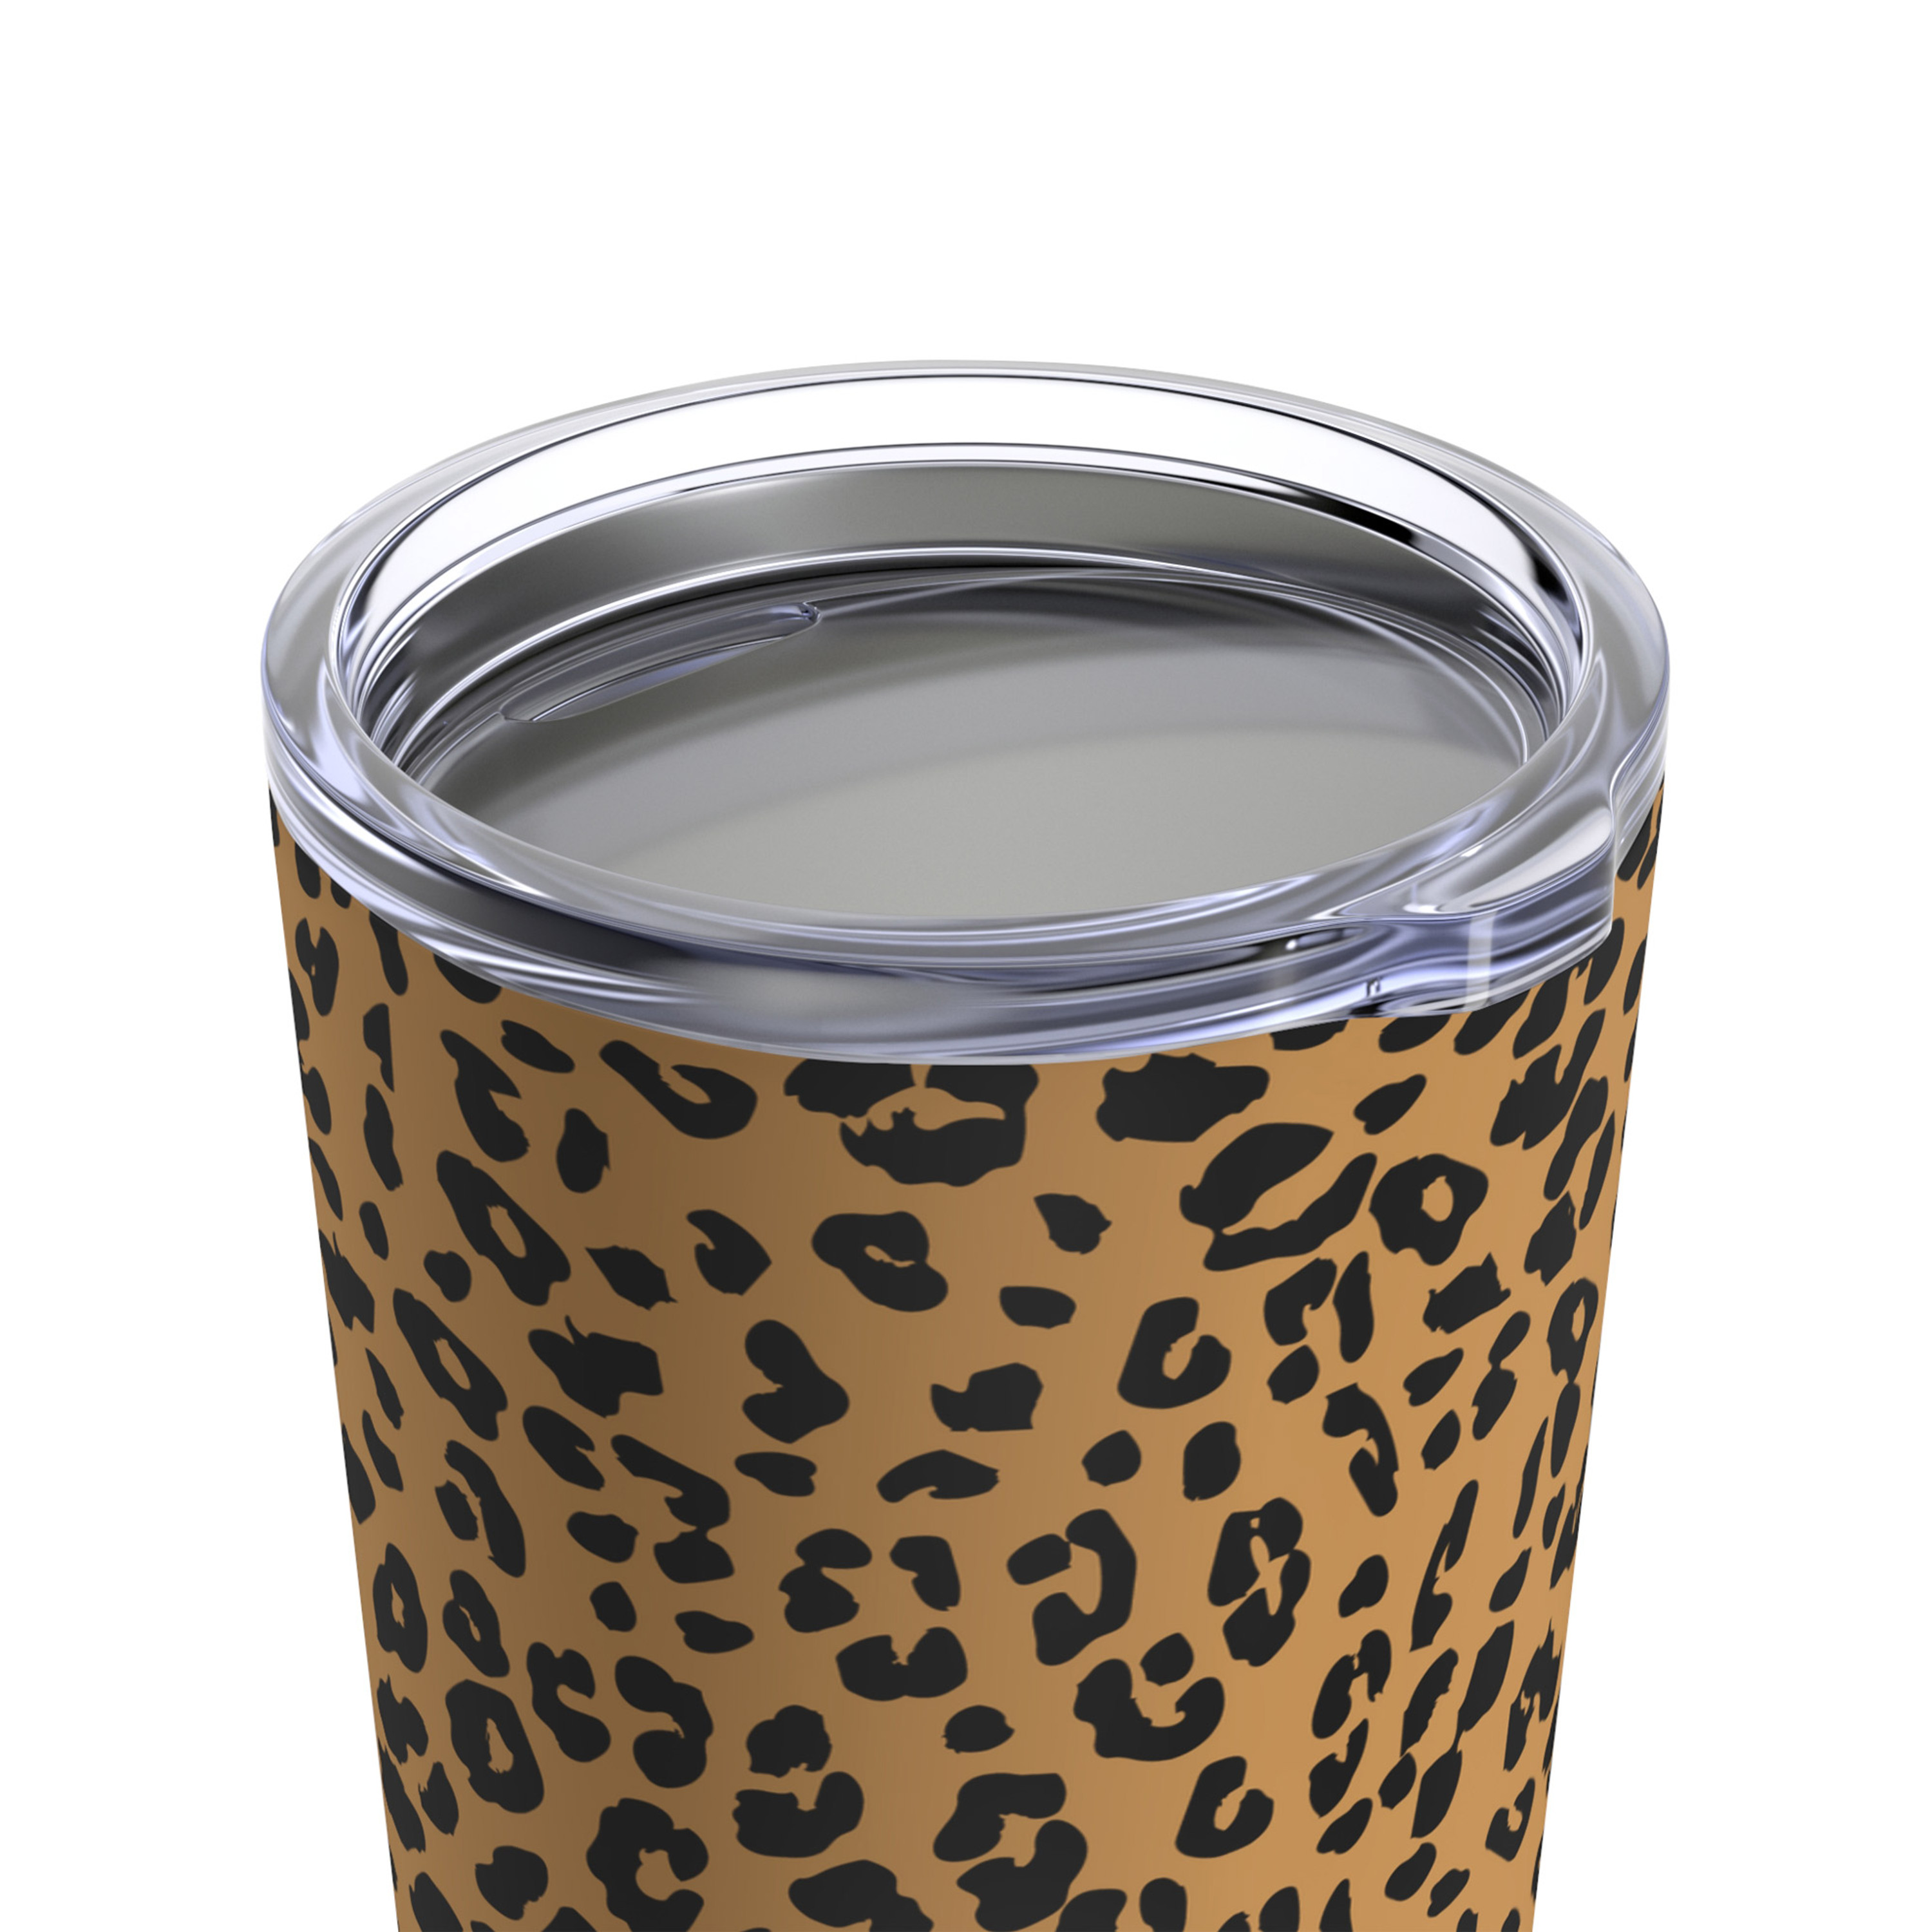  Weboia 20 oz Leopard Print Tumbler Birthday Gifts for